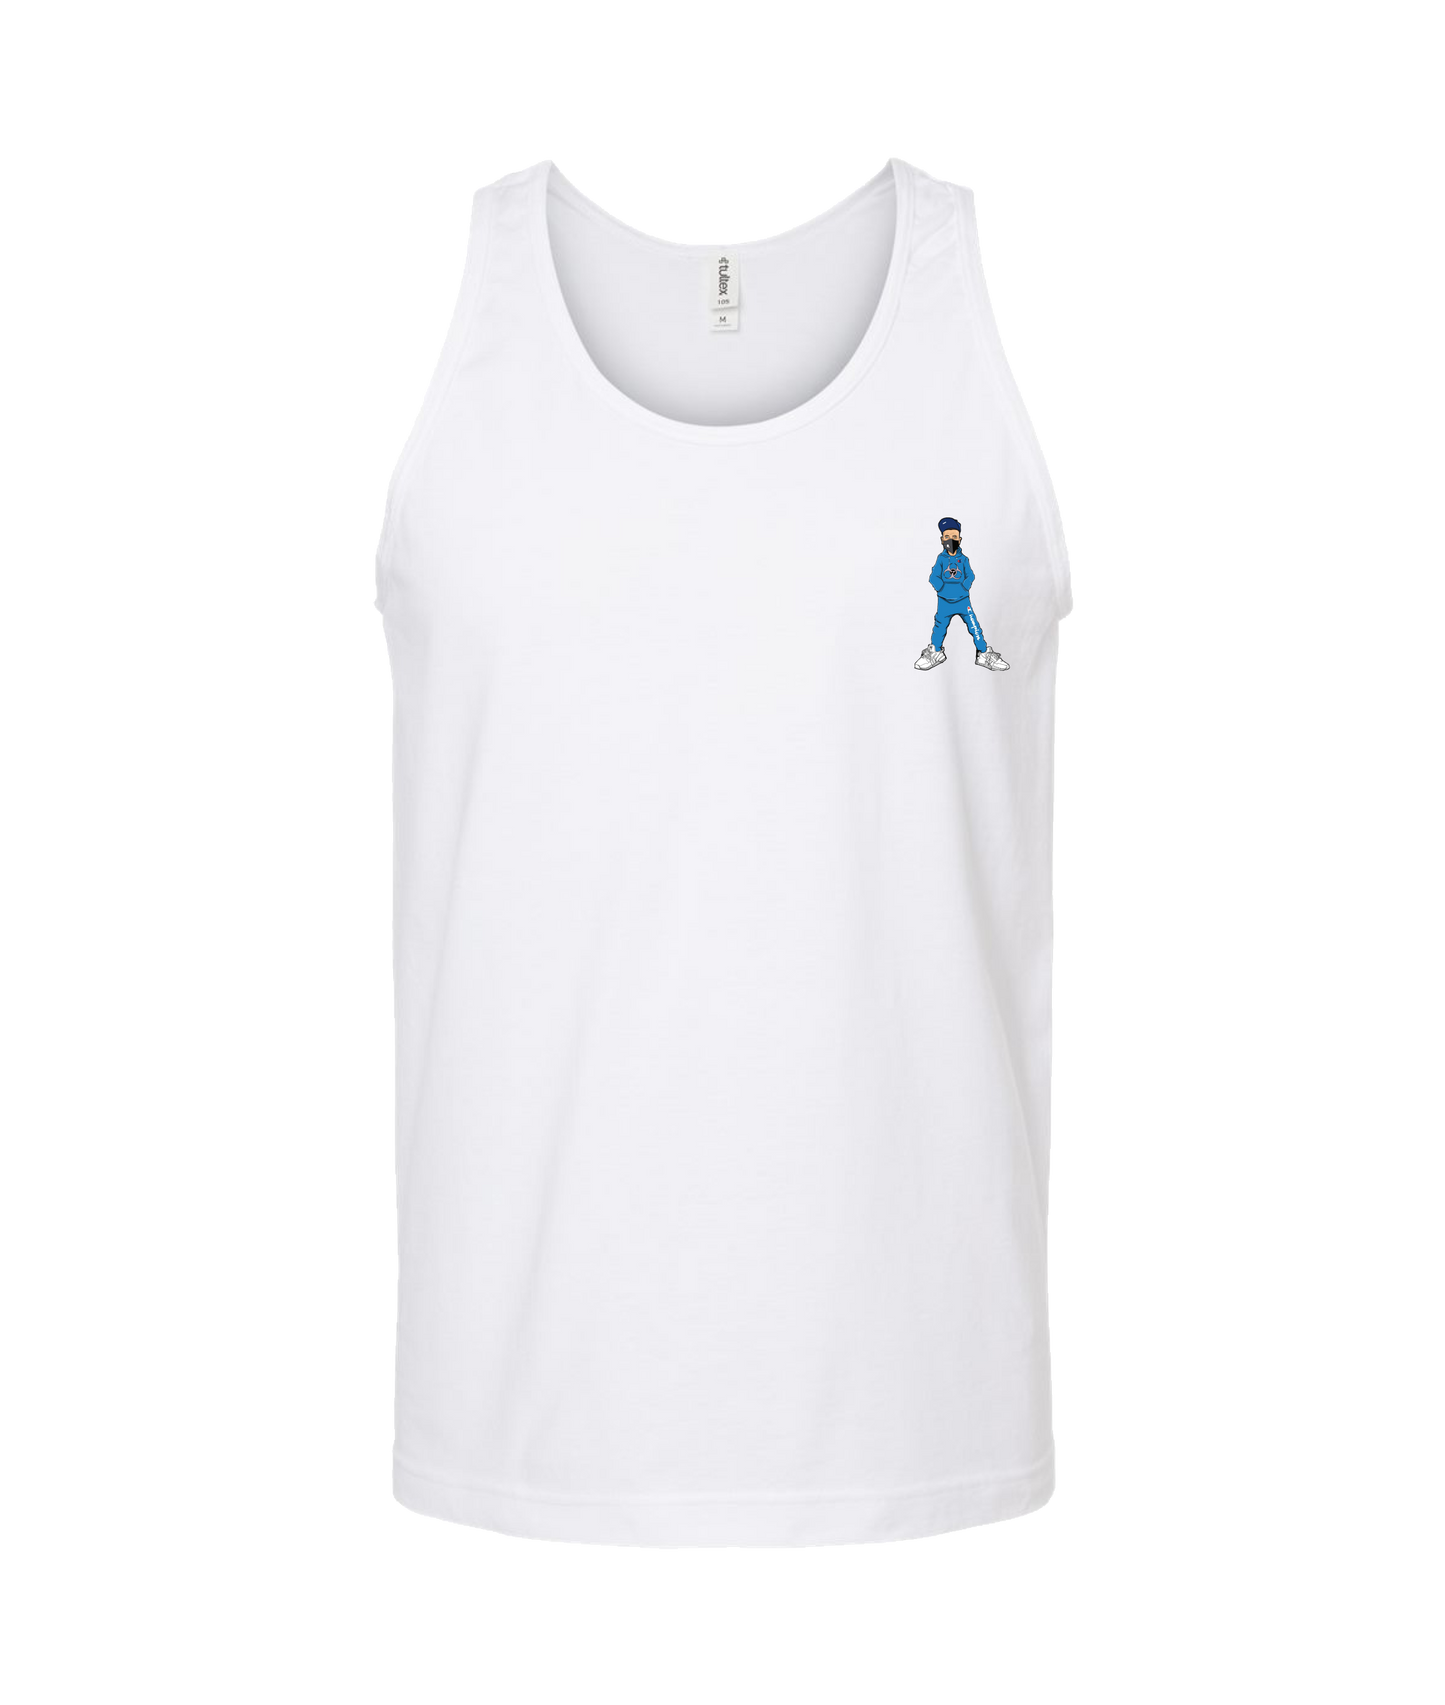 New England Clones - RIGUY - White Tank Top